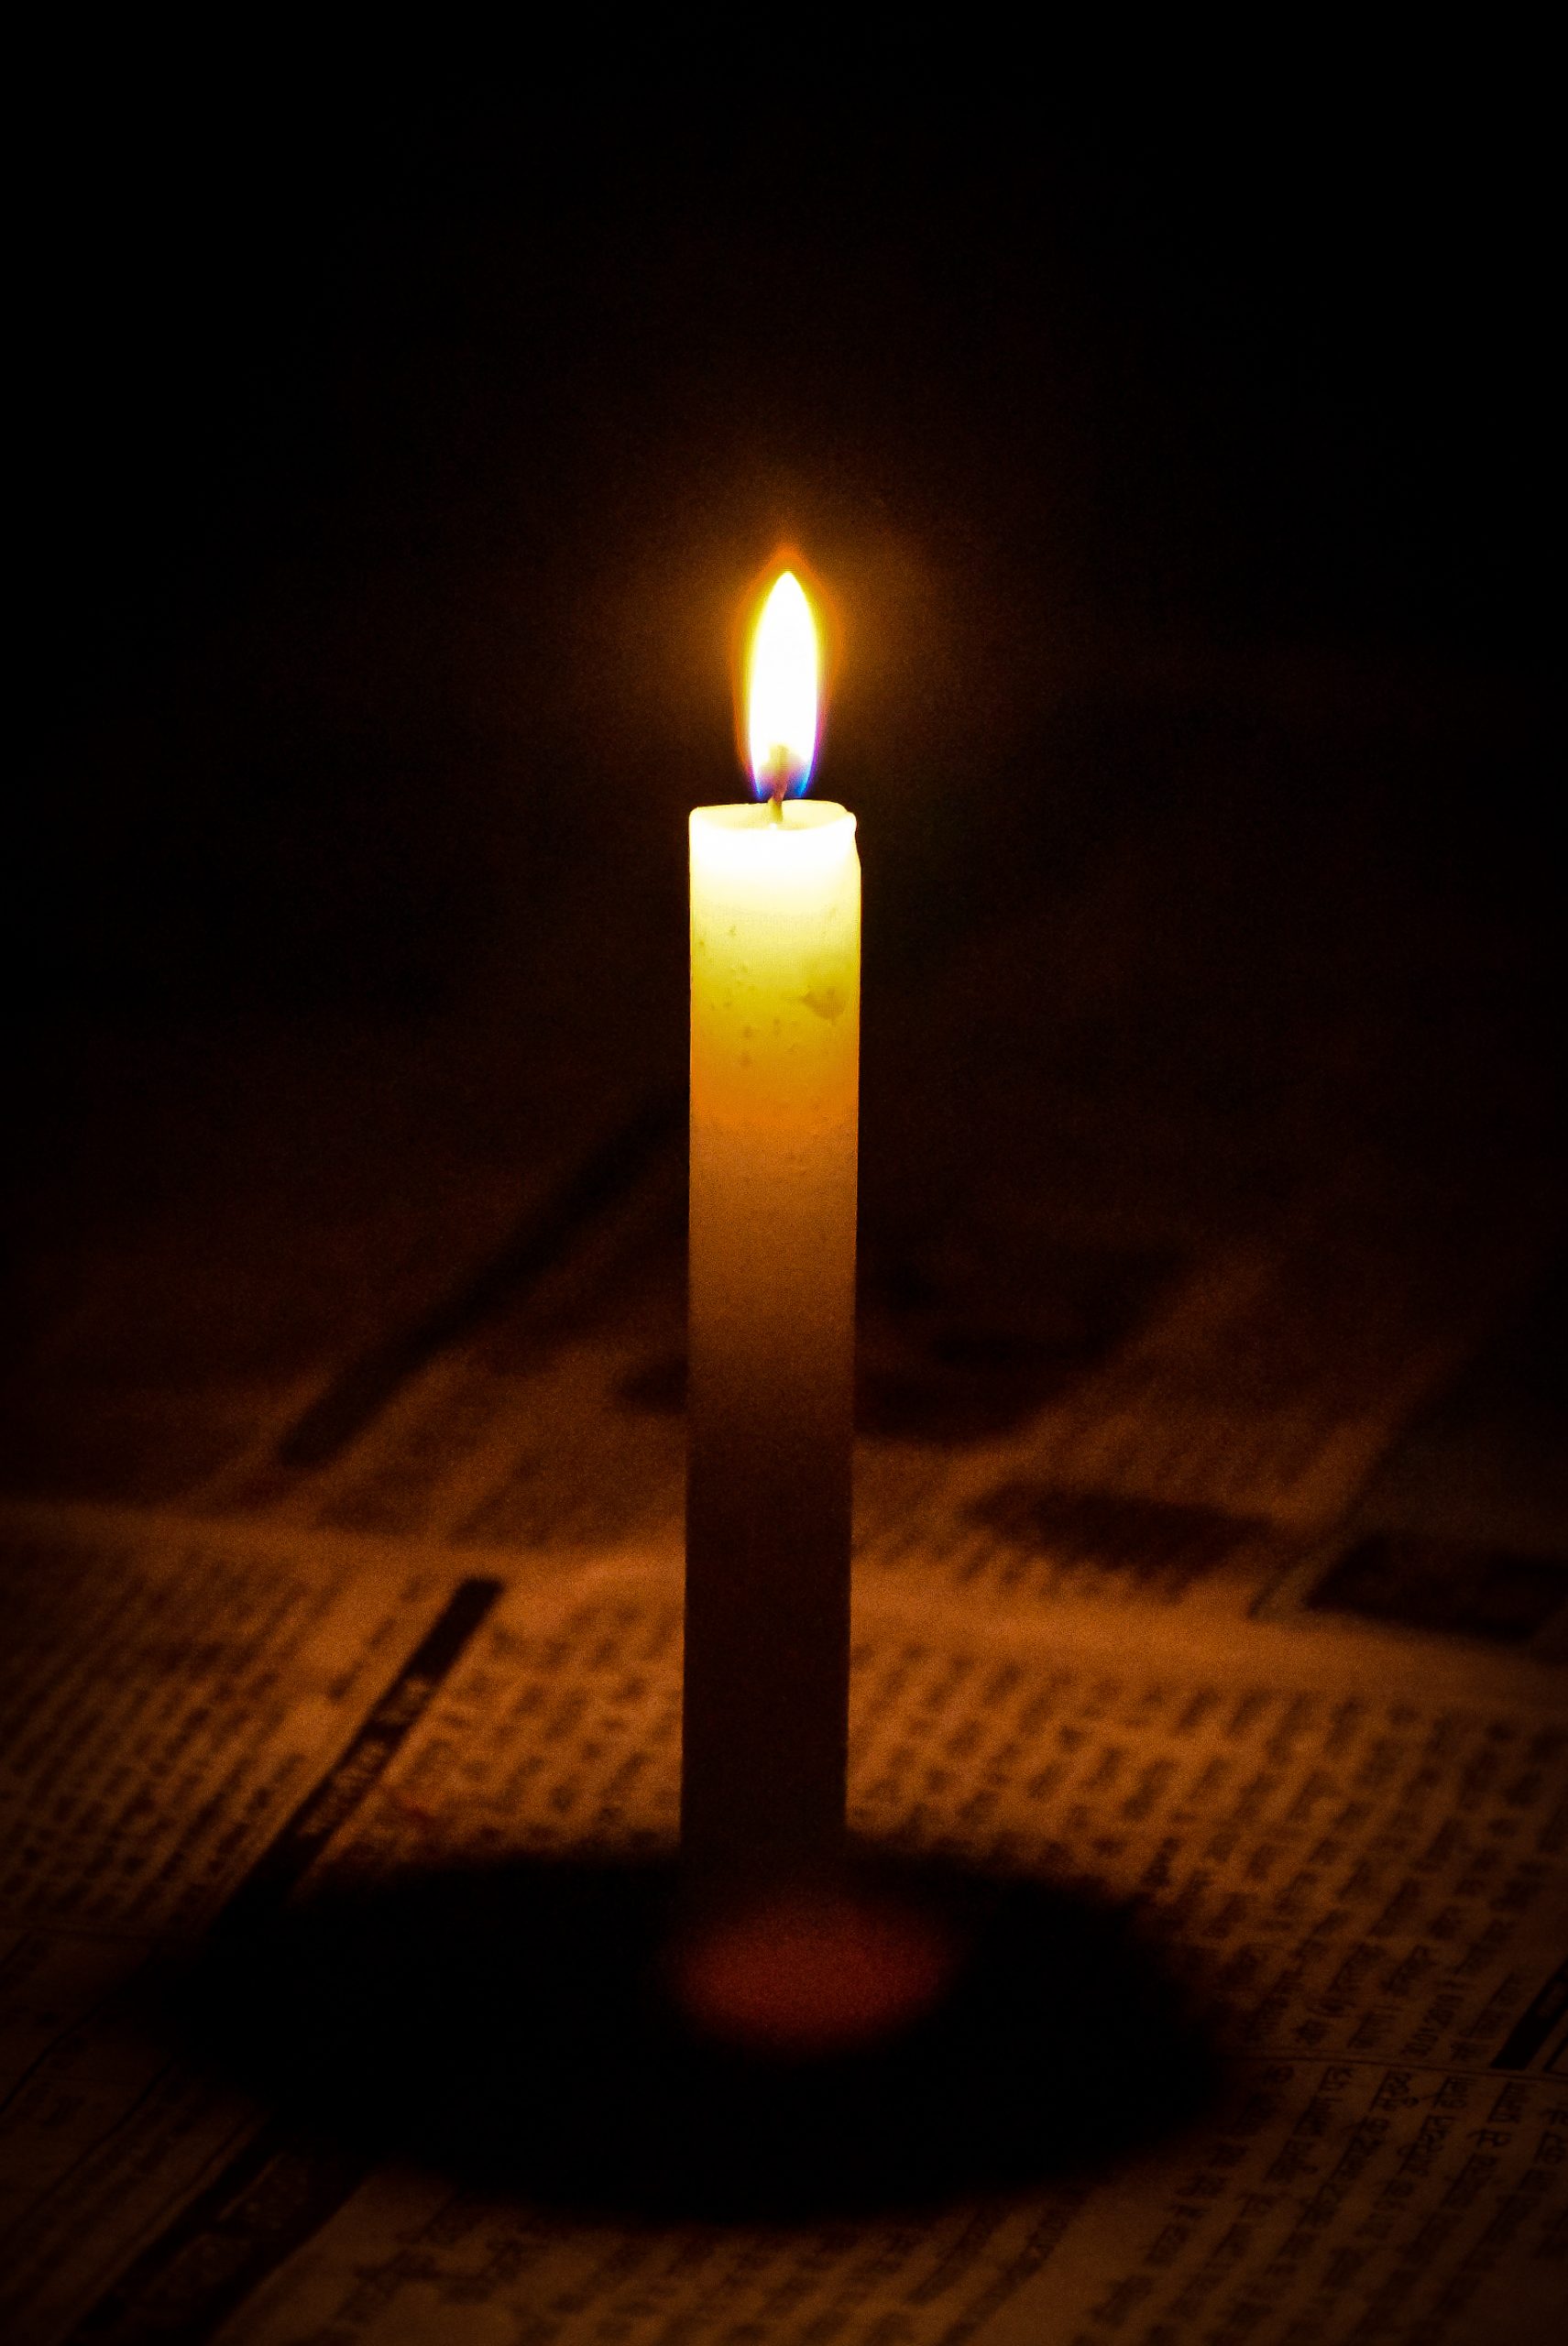 A Standing Lighted Candle